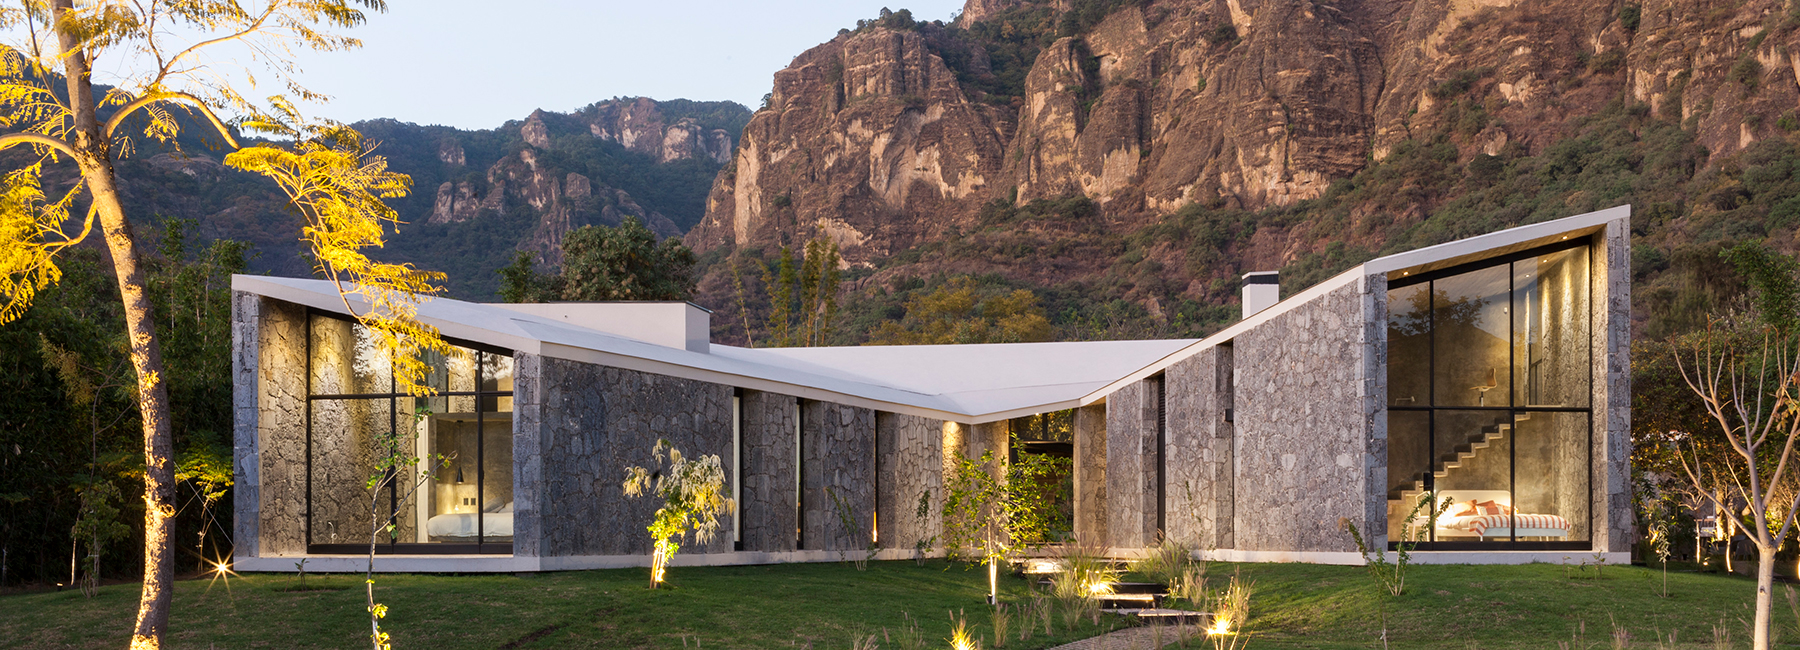 cadaval & solà morales use stone to construct angular house in rural mexico